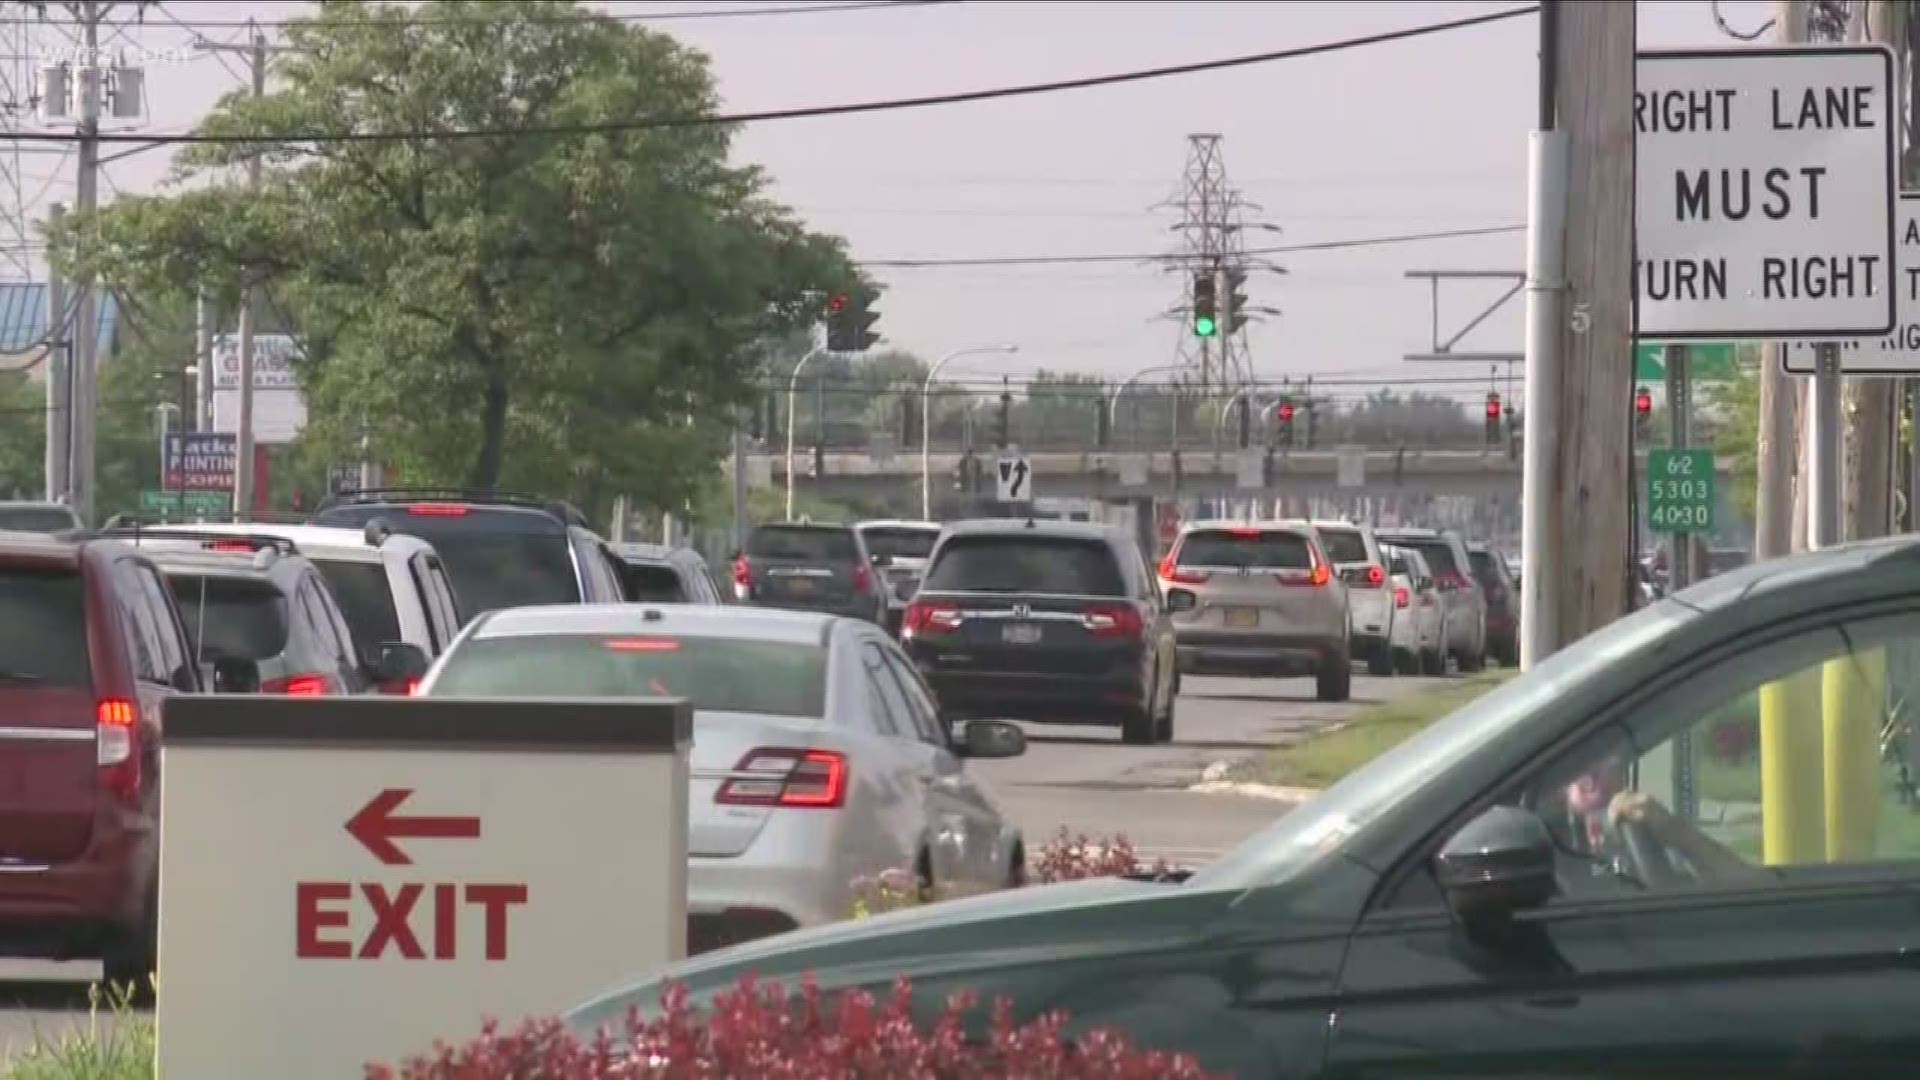 The state has made recommendations on how to make Niagara Falls Blvd safer.